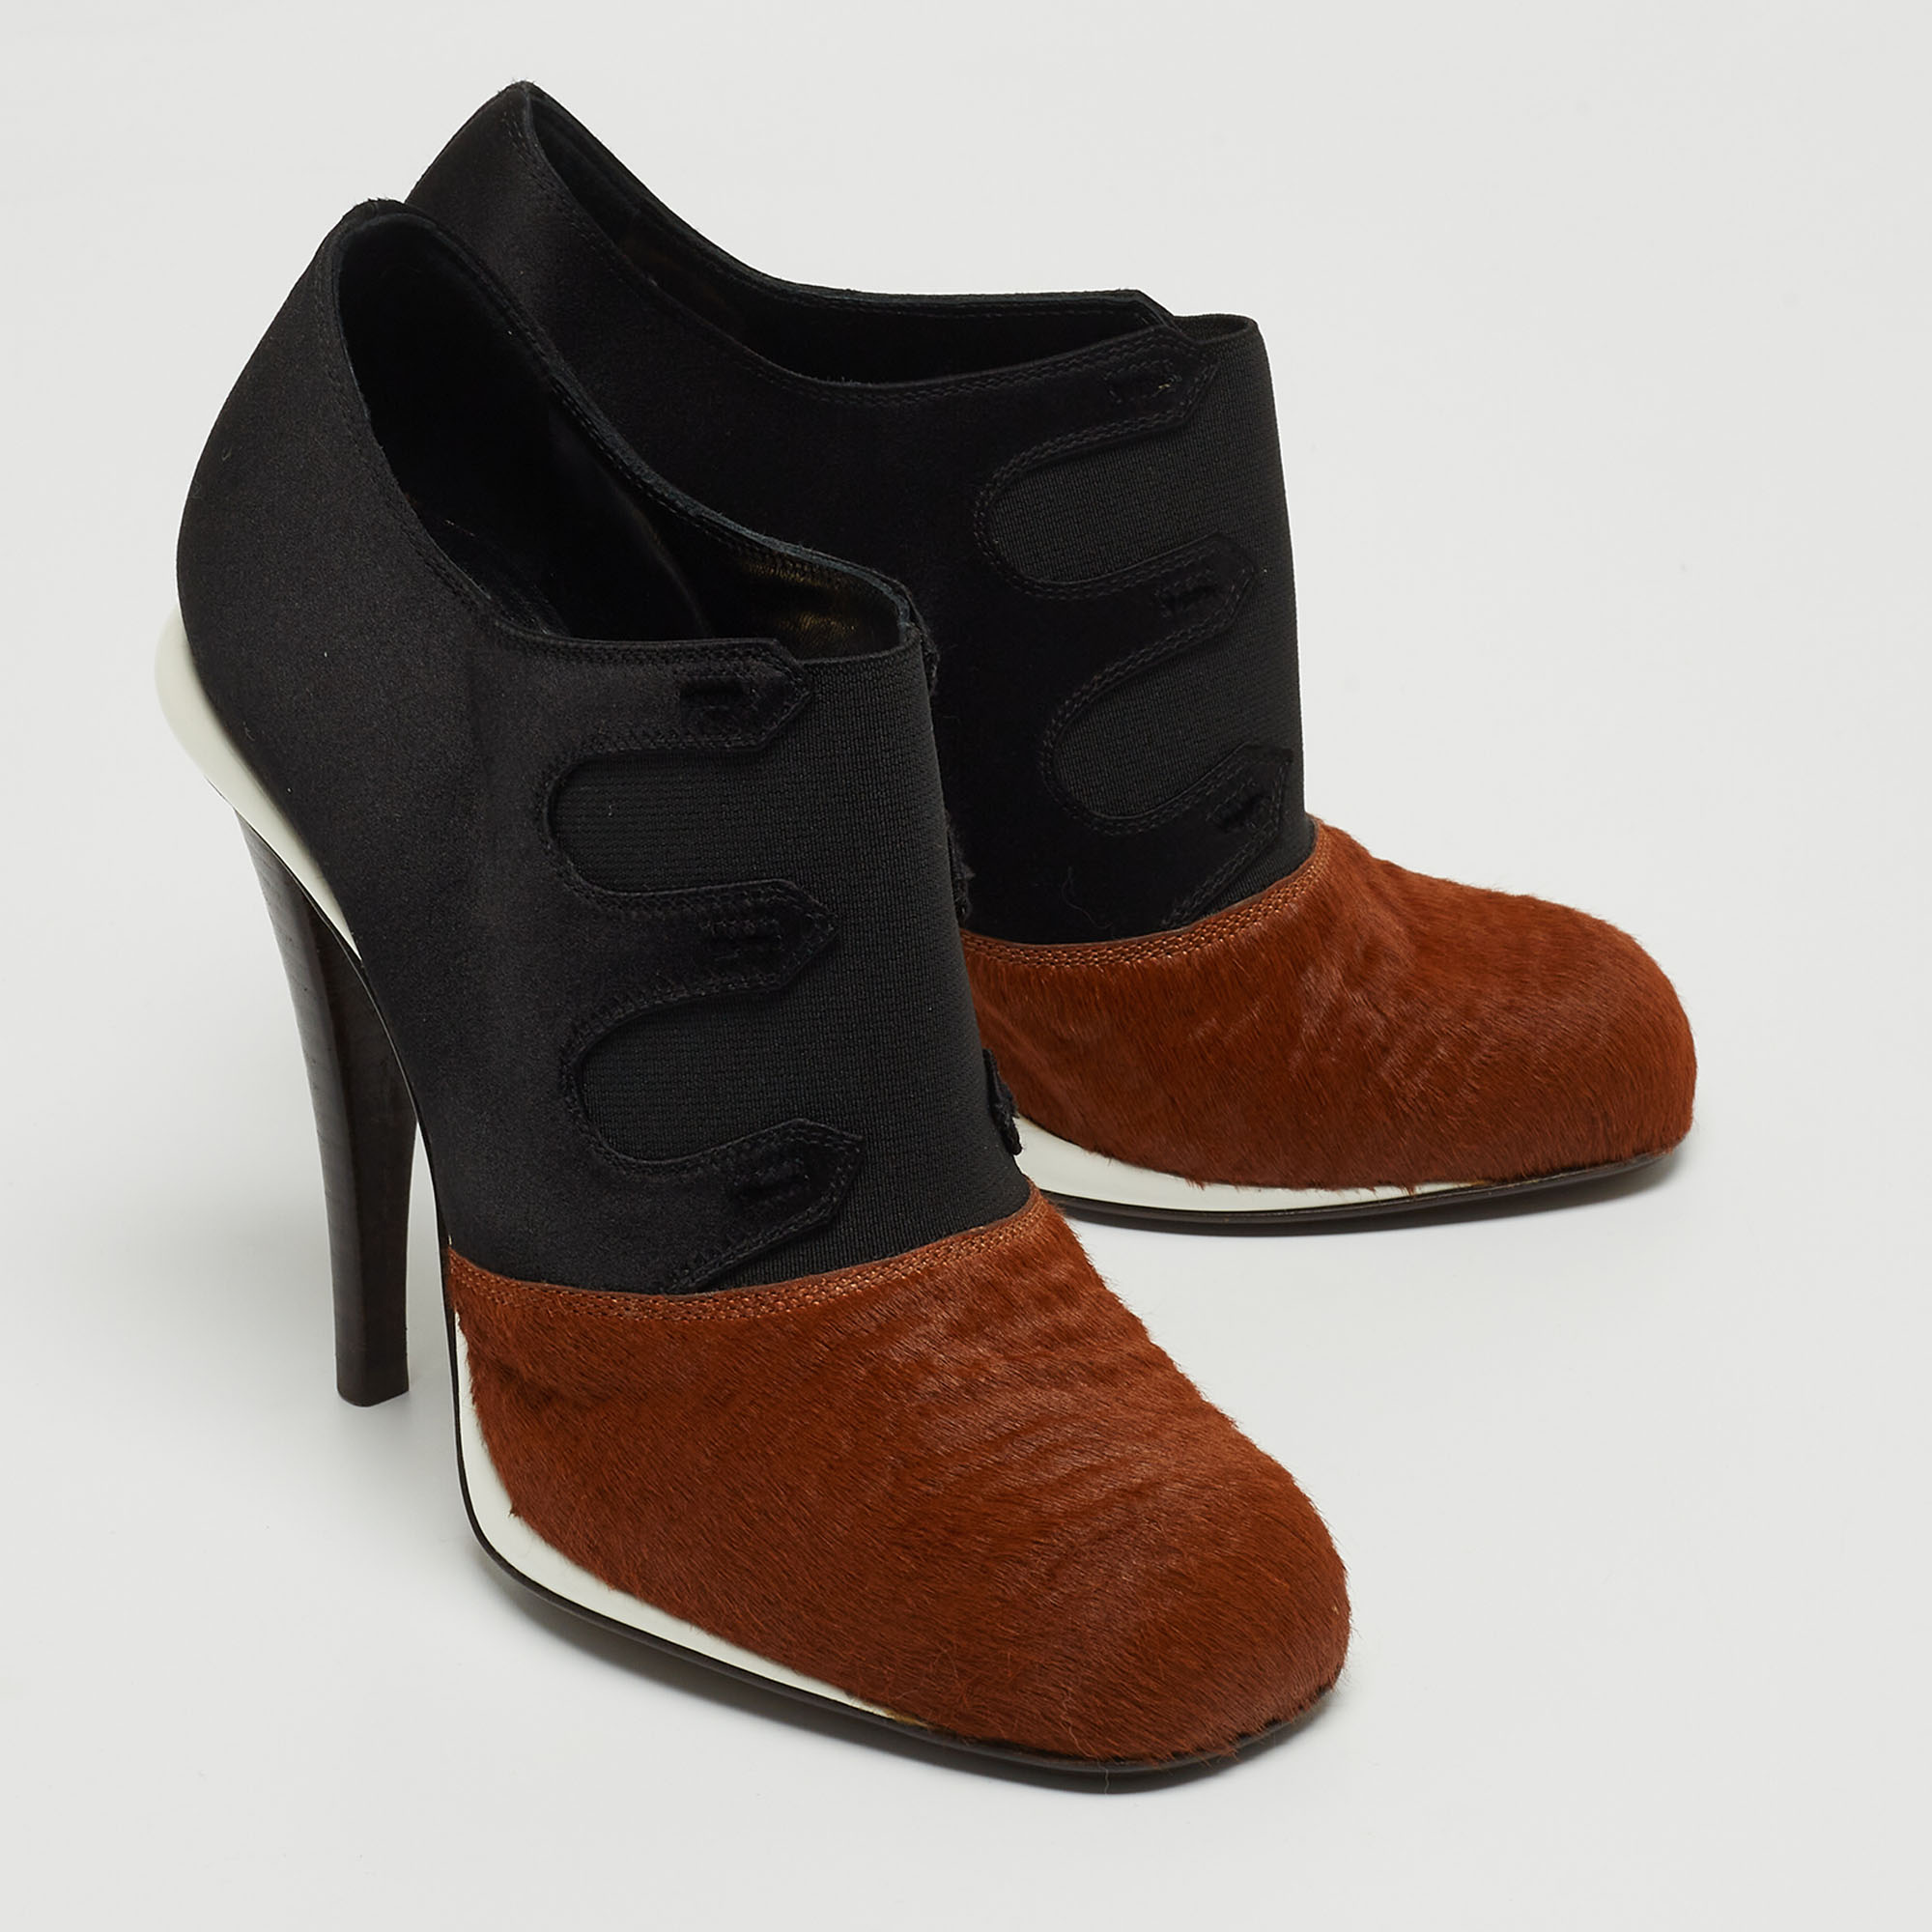 Fendi Brown/Black Calf Hair And Satin Ankle Booties Size 37